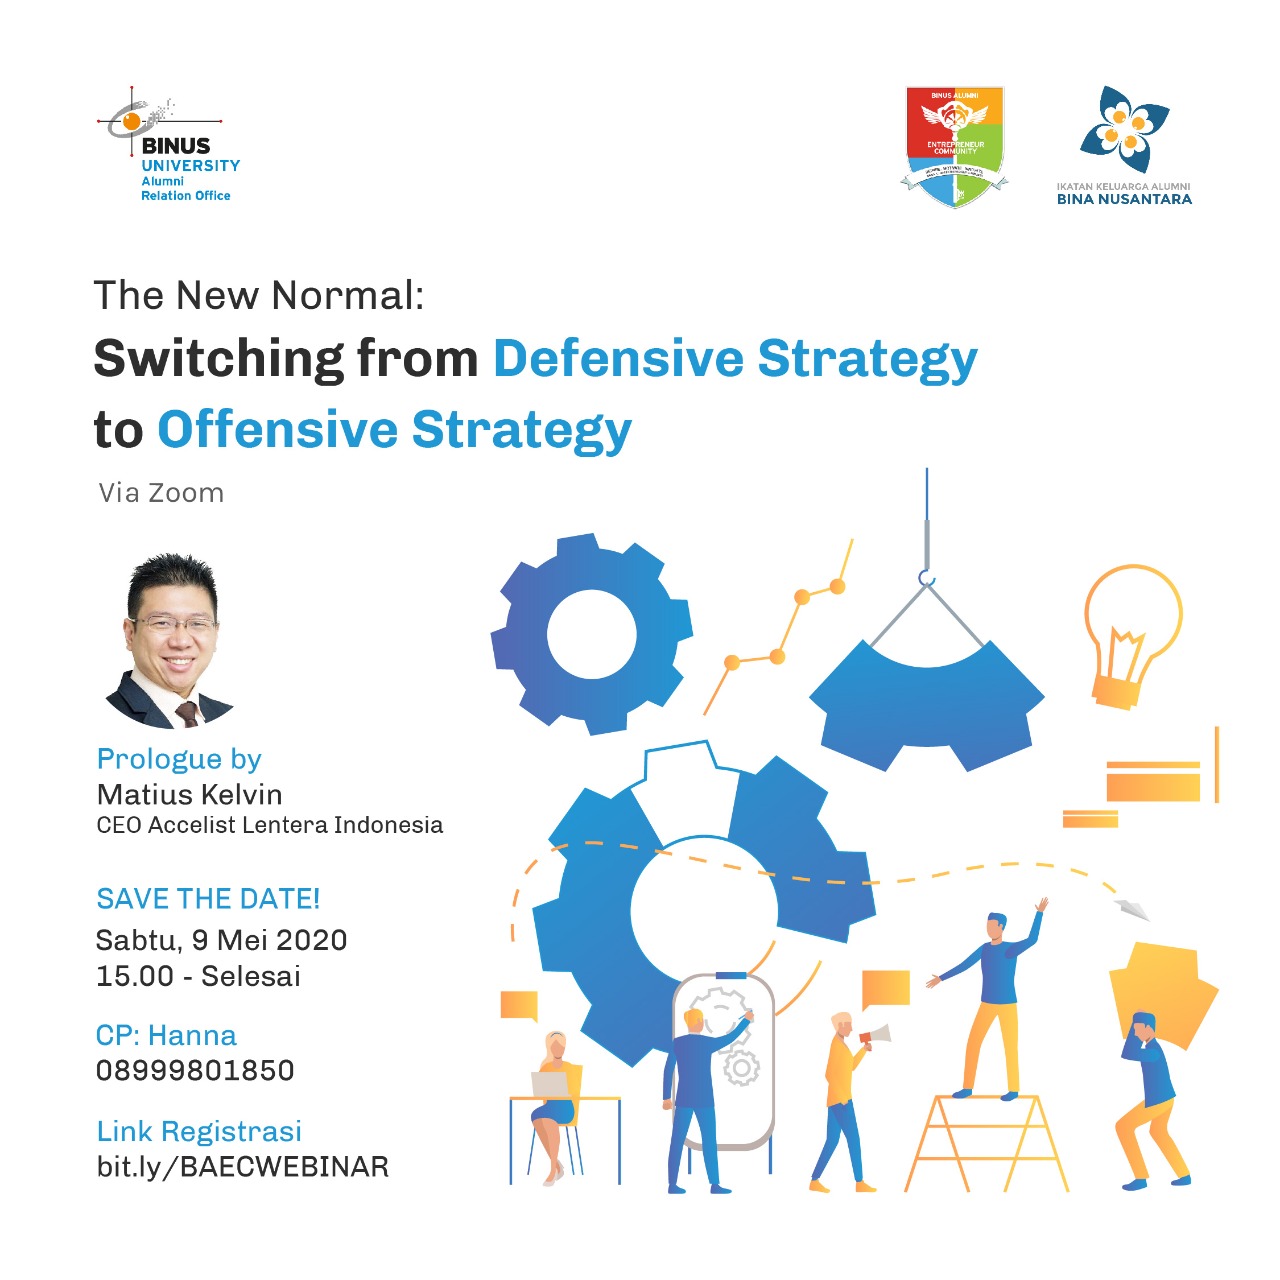 Switching from Defensive Strategy to Offensive Strategy